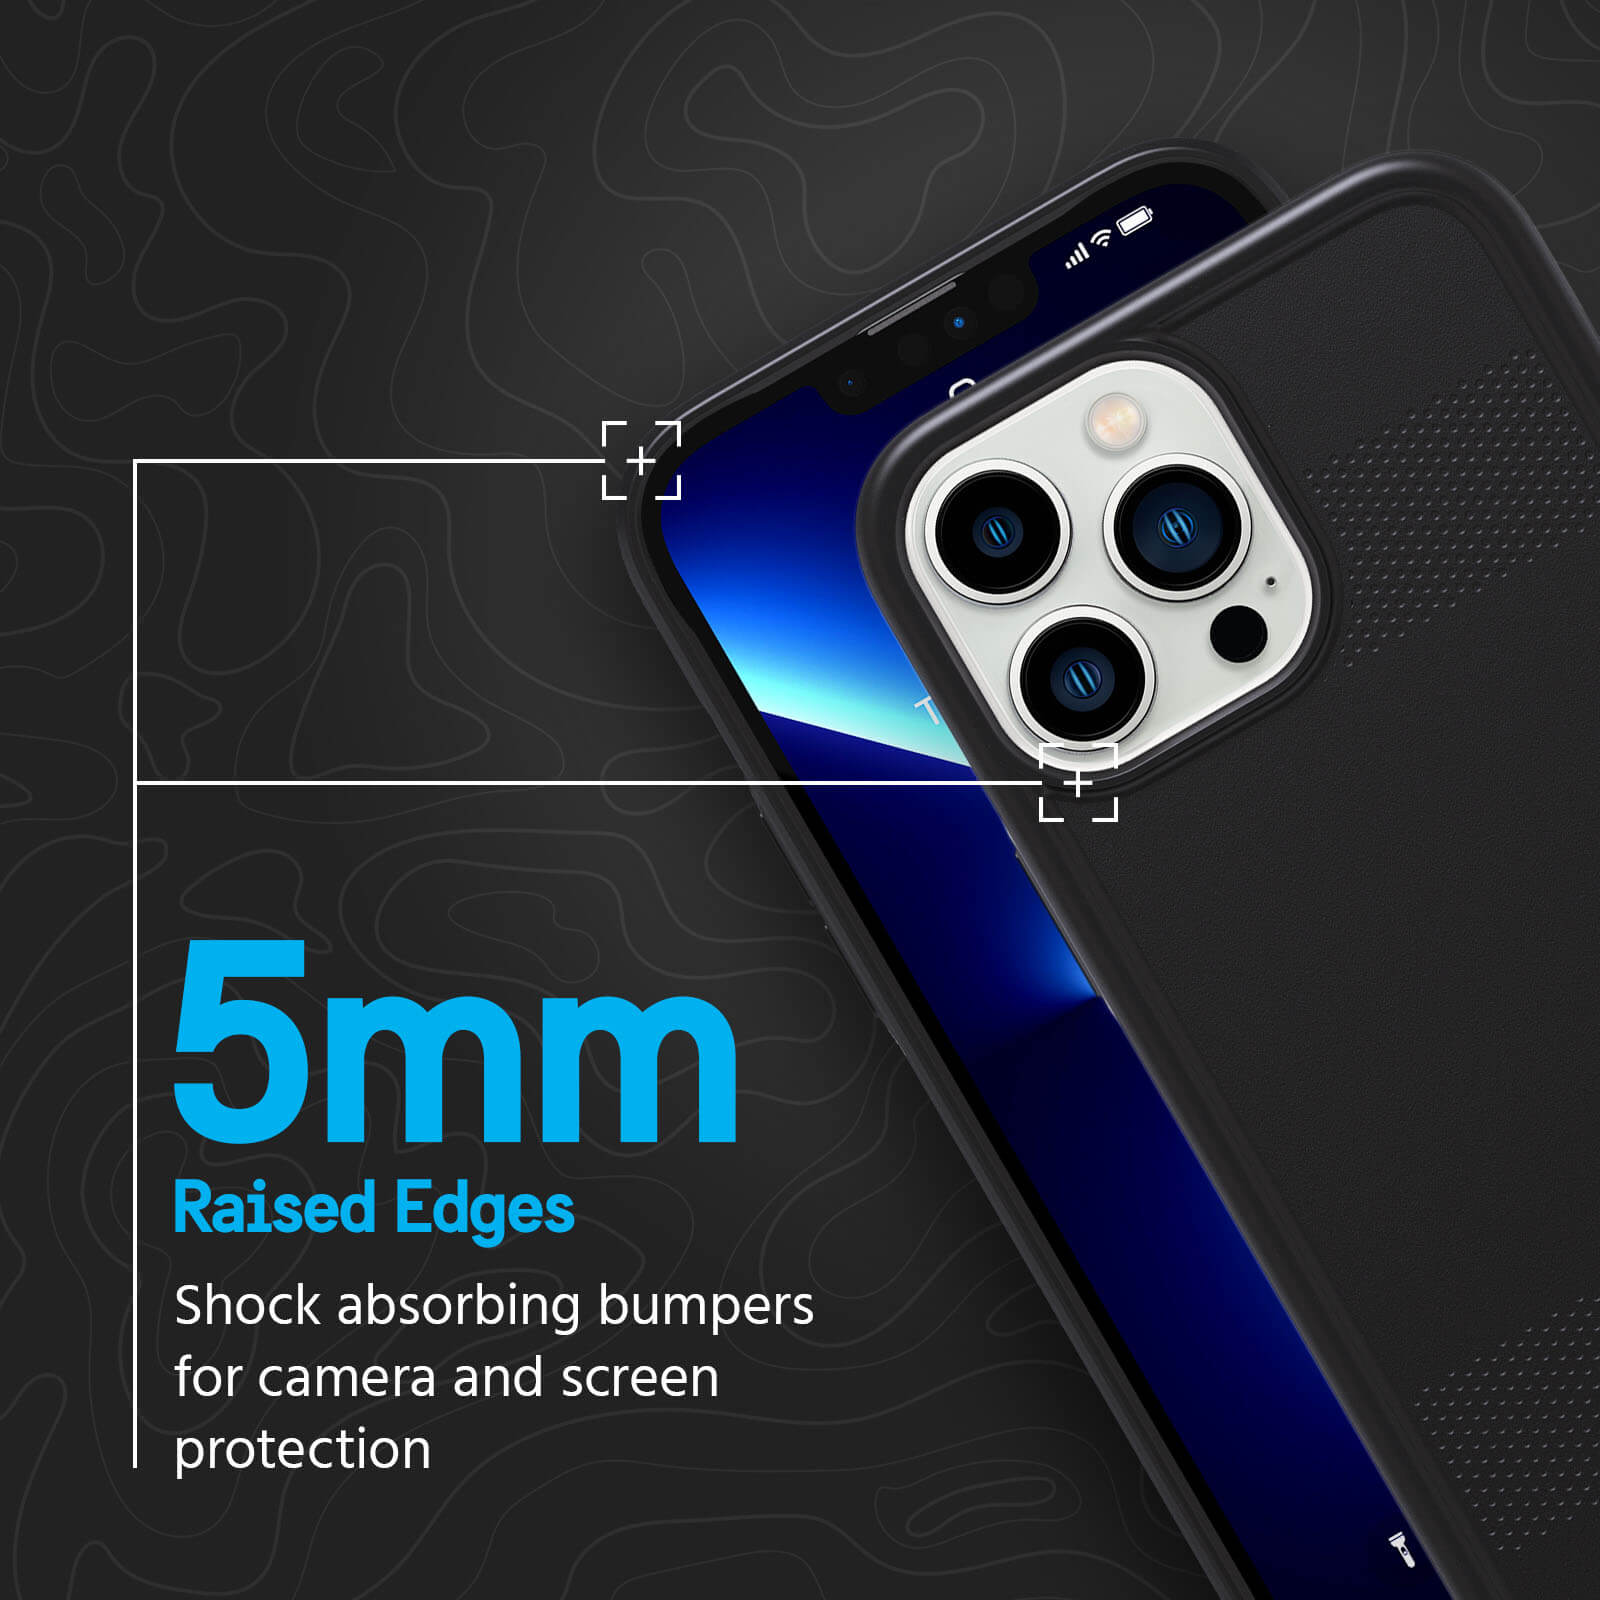 5mm raised edges shock absorbing bumpers for camera and screen protection. color::Black